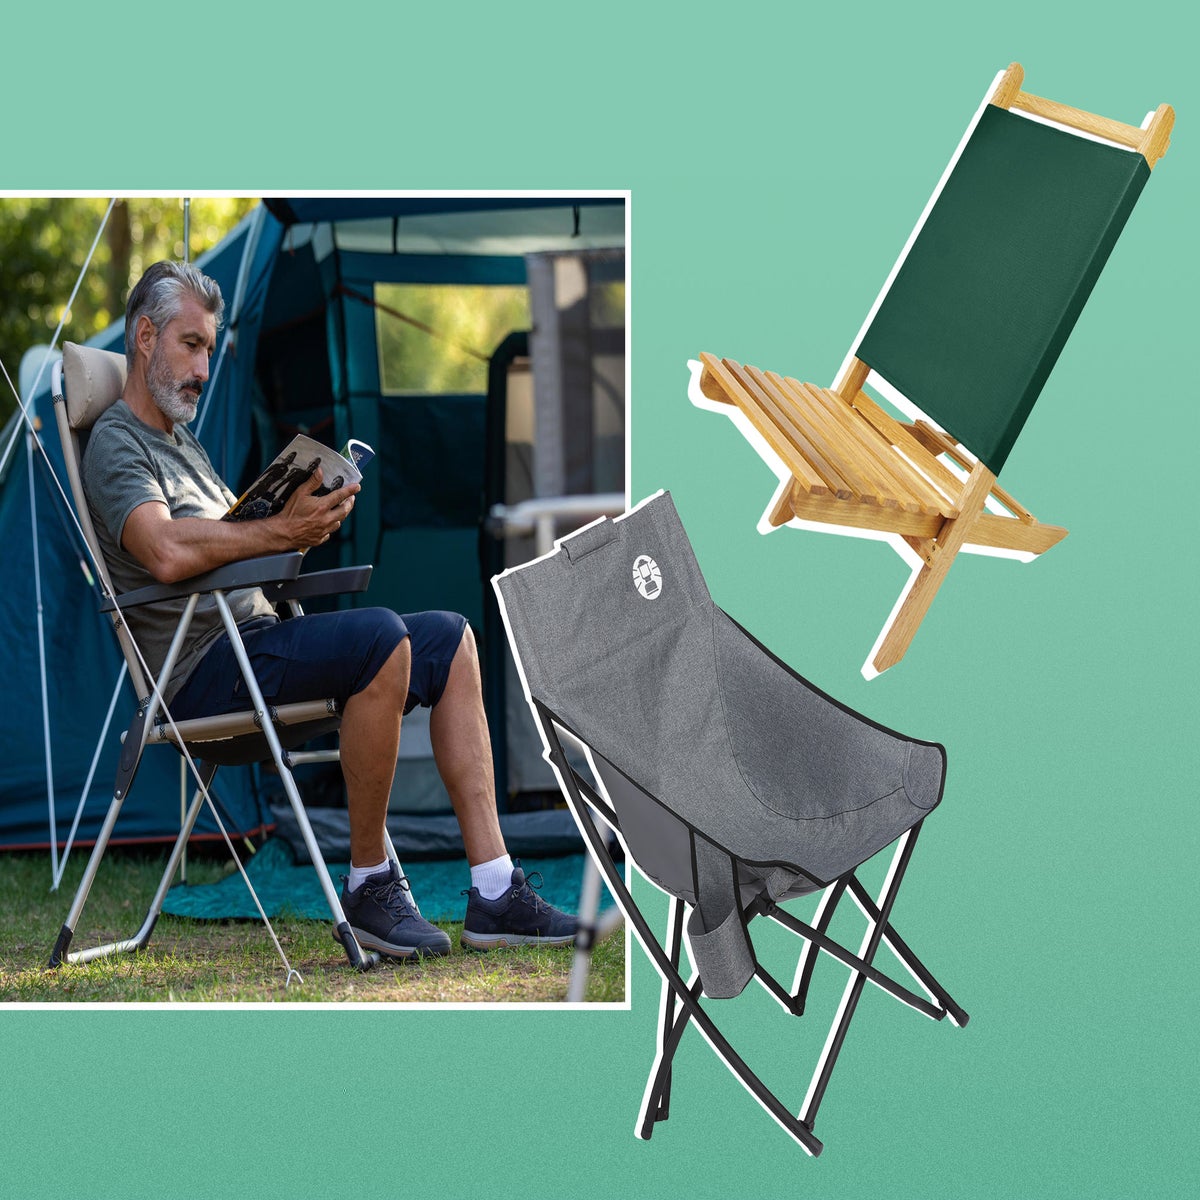 https://static.independent.co.uk/2023/04/19/12/best%20camping%20chairs2%20copy-2.jpg?width=1200&height=1200&fit=crop